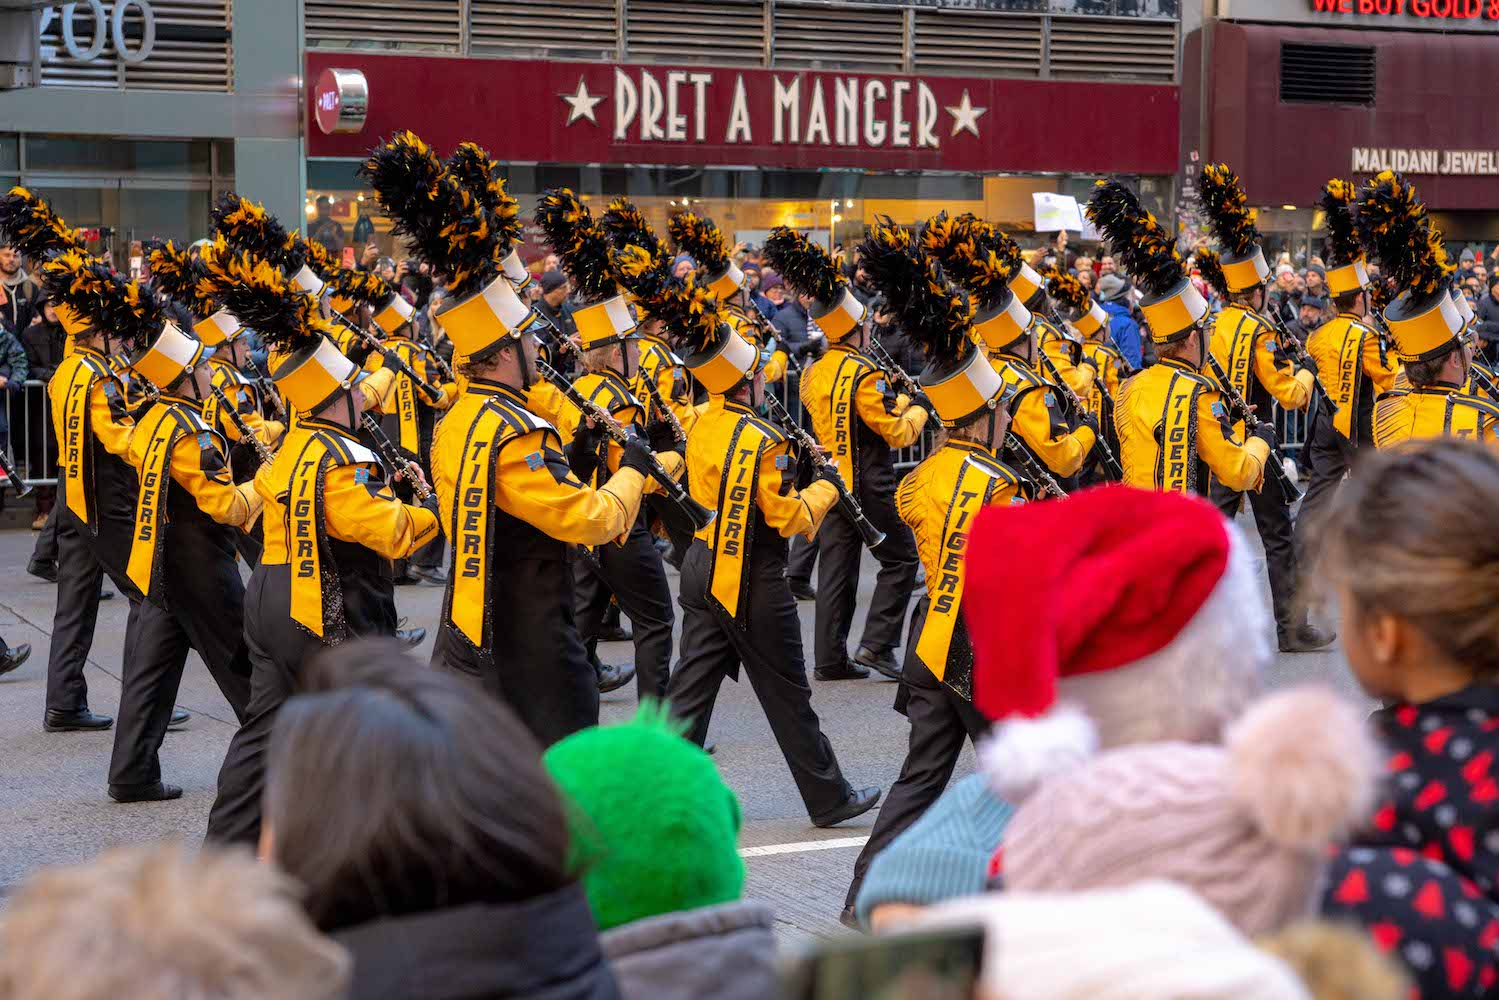 A marching band wearing identical yellow suits, black pants, and feathered hats walking down Sixth Avenue in Manhattan while playing clarinets. In the foreground are crowds watching the parade.